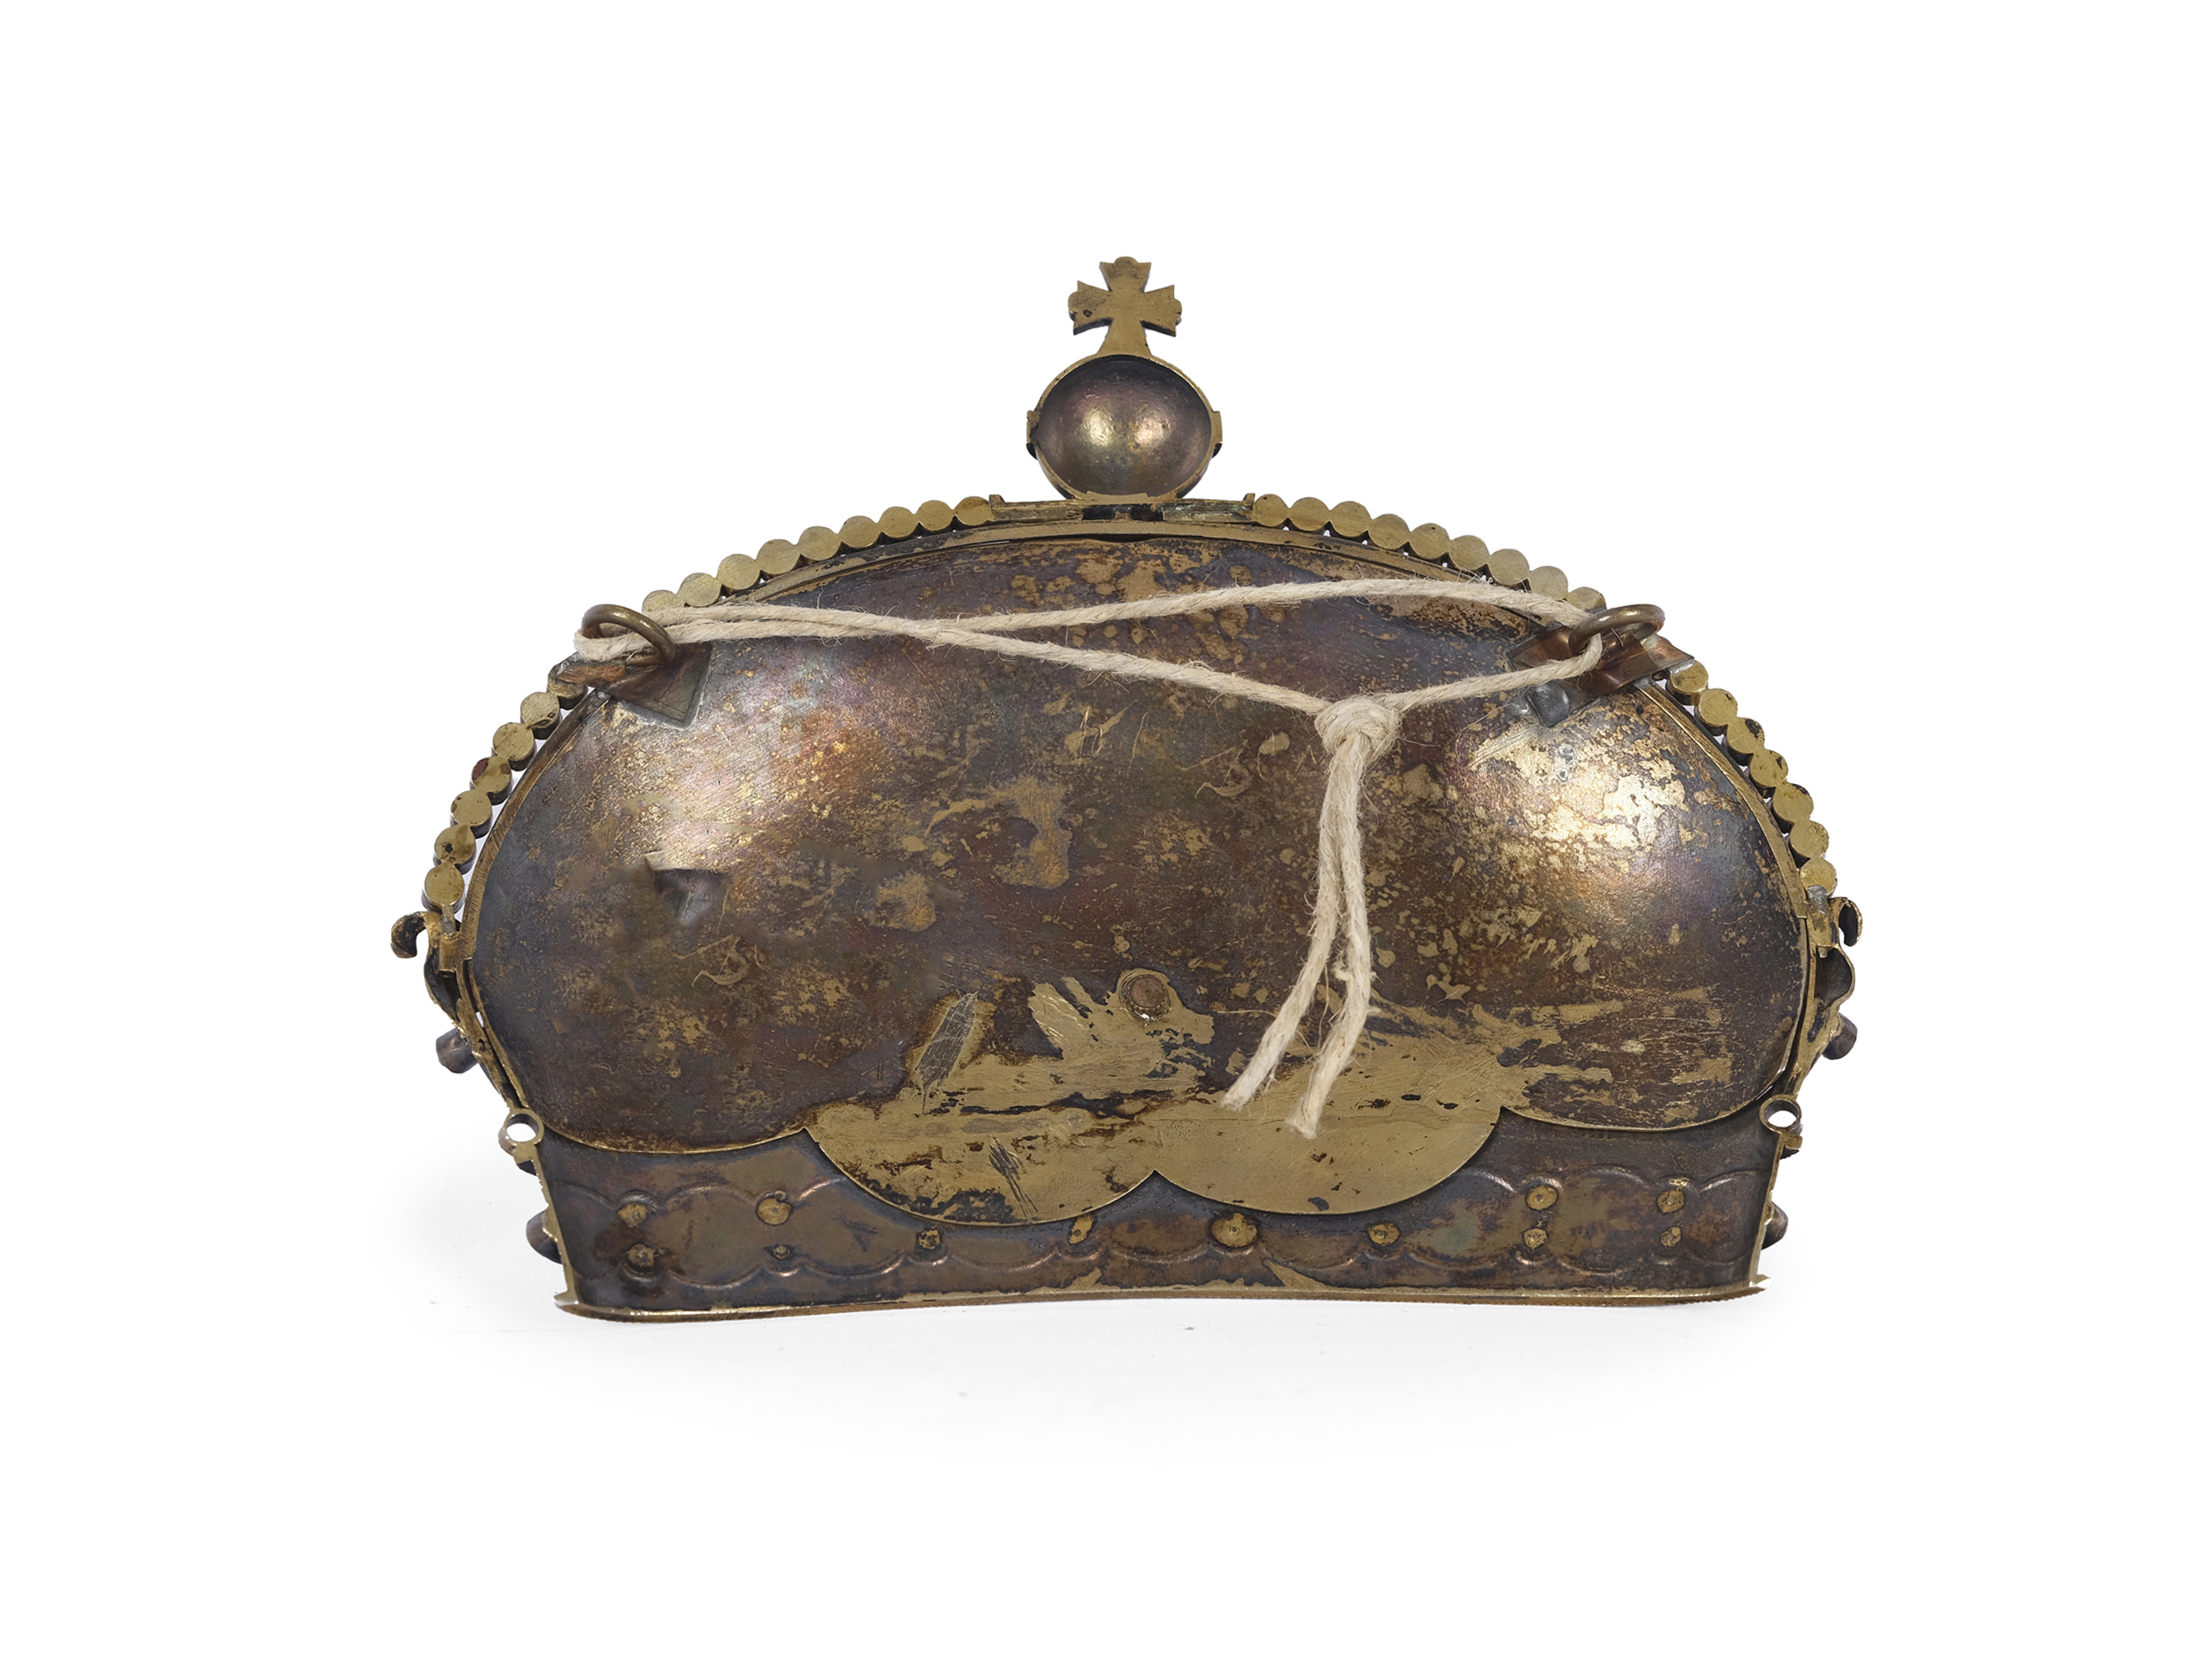 Crown in the Fabergé style, 19th century - Image 2 of 2